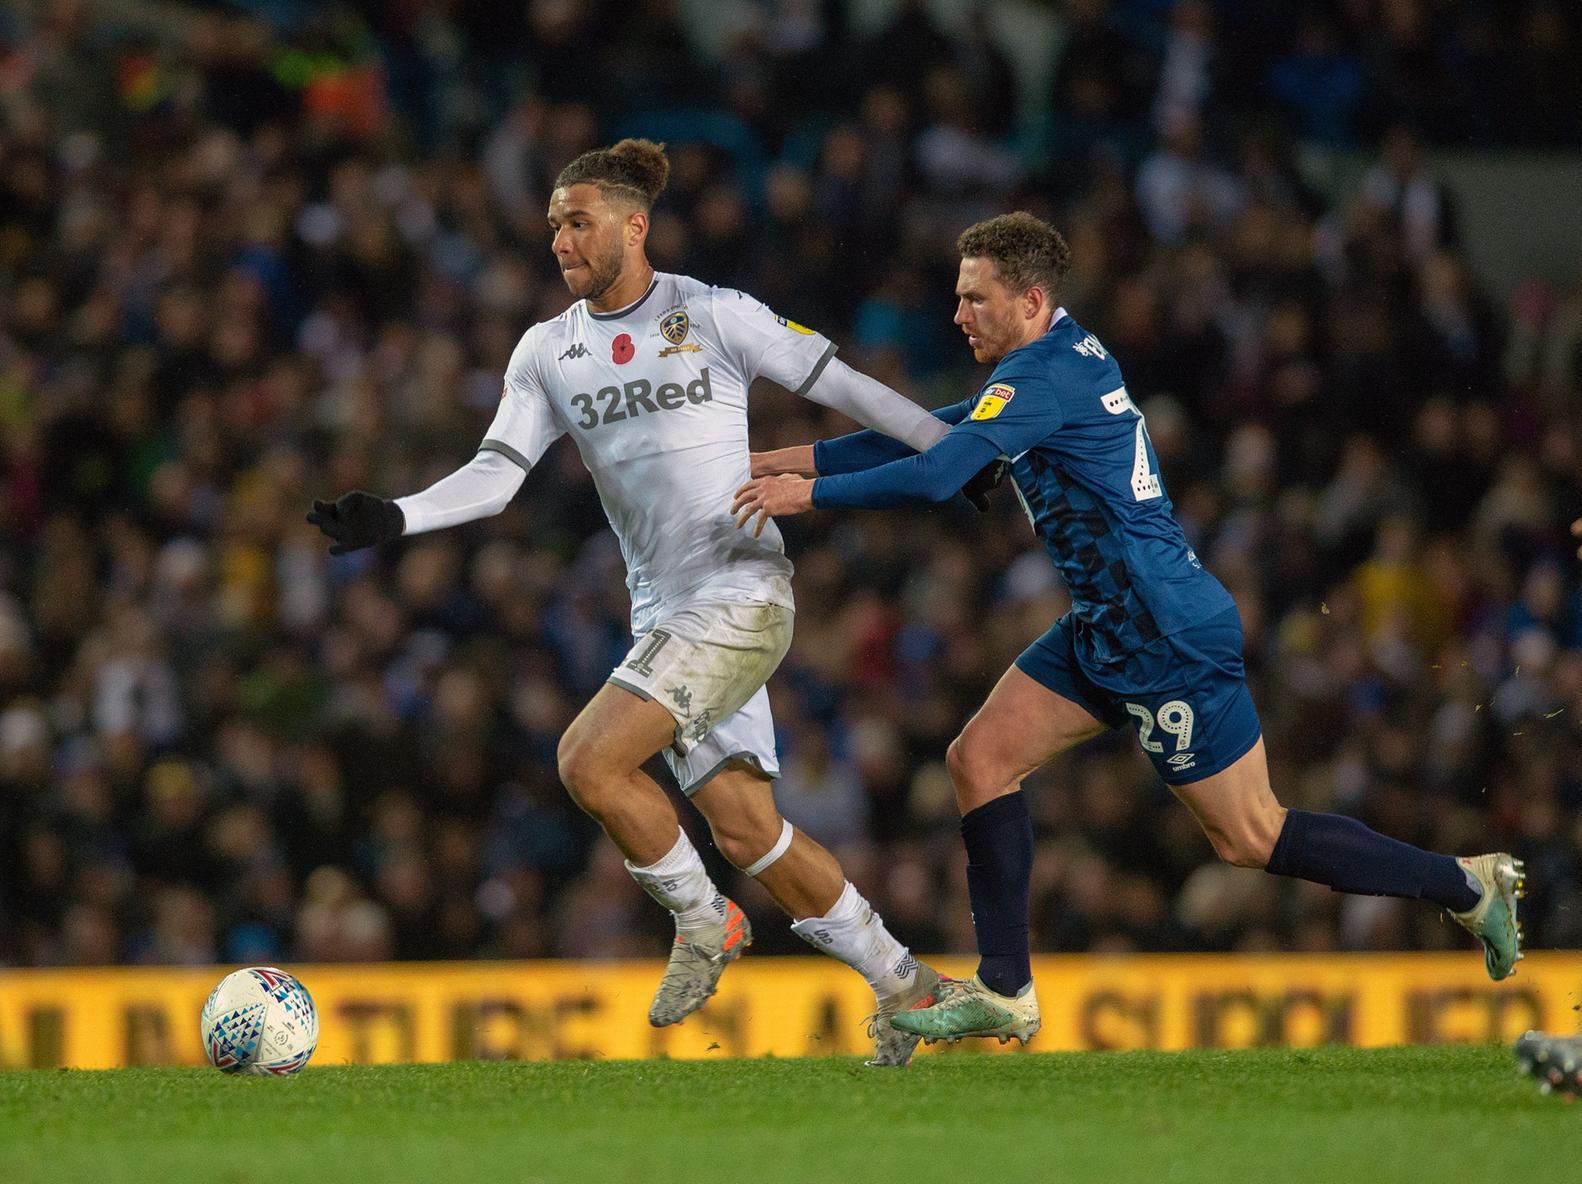 6 - Kept quiet for his short time on the pitch. Another frustrating injury continued the stop-start theme of his Leeds career.